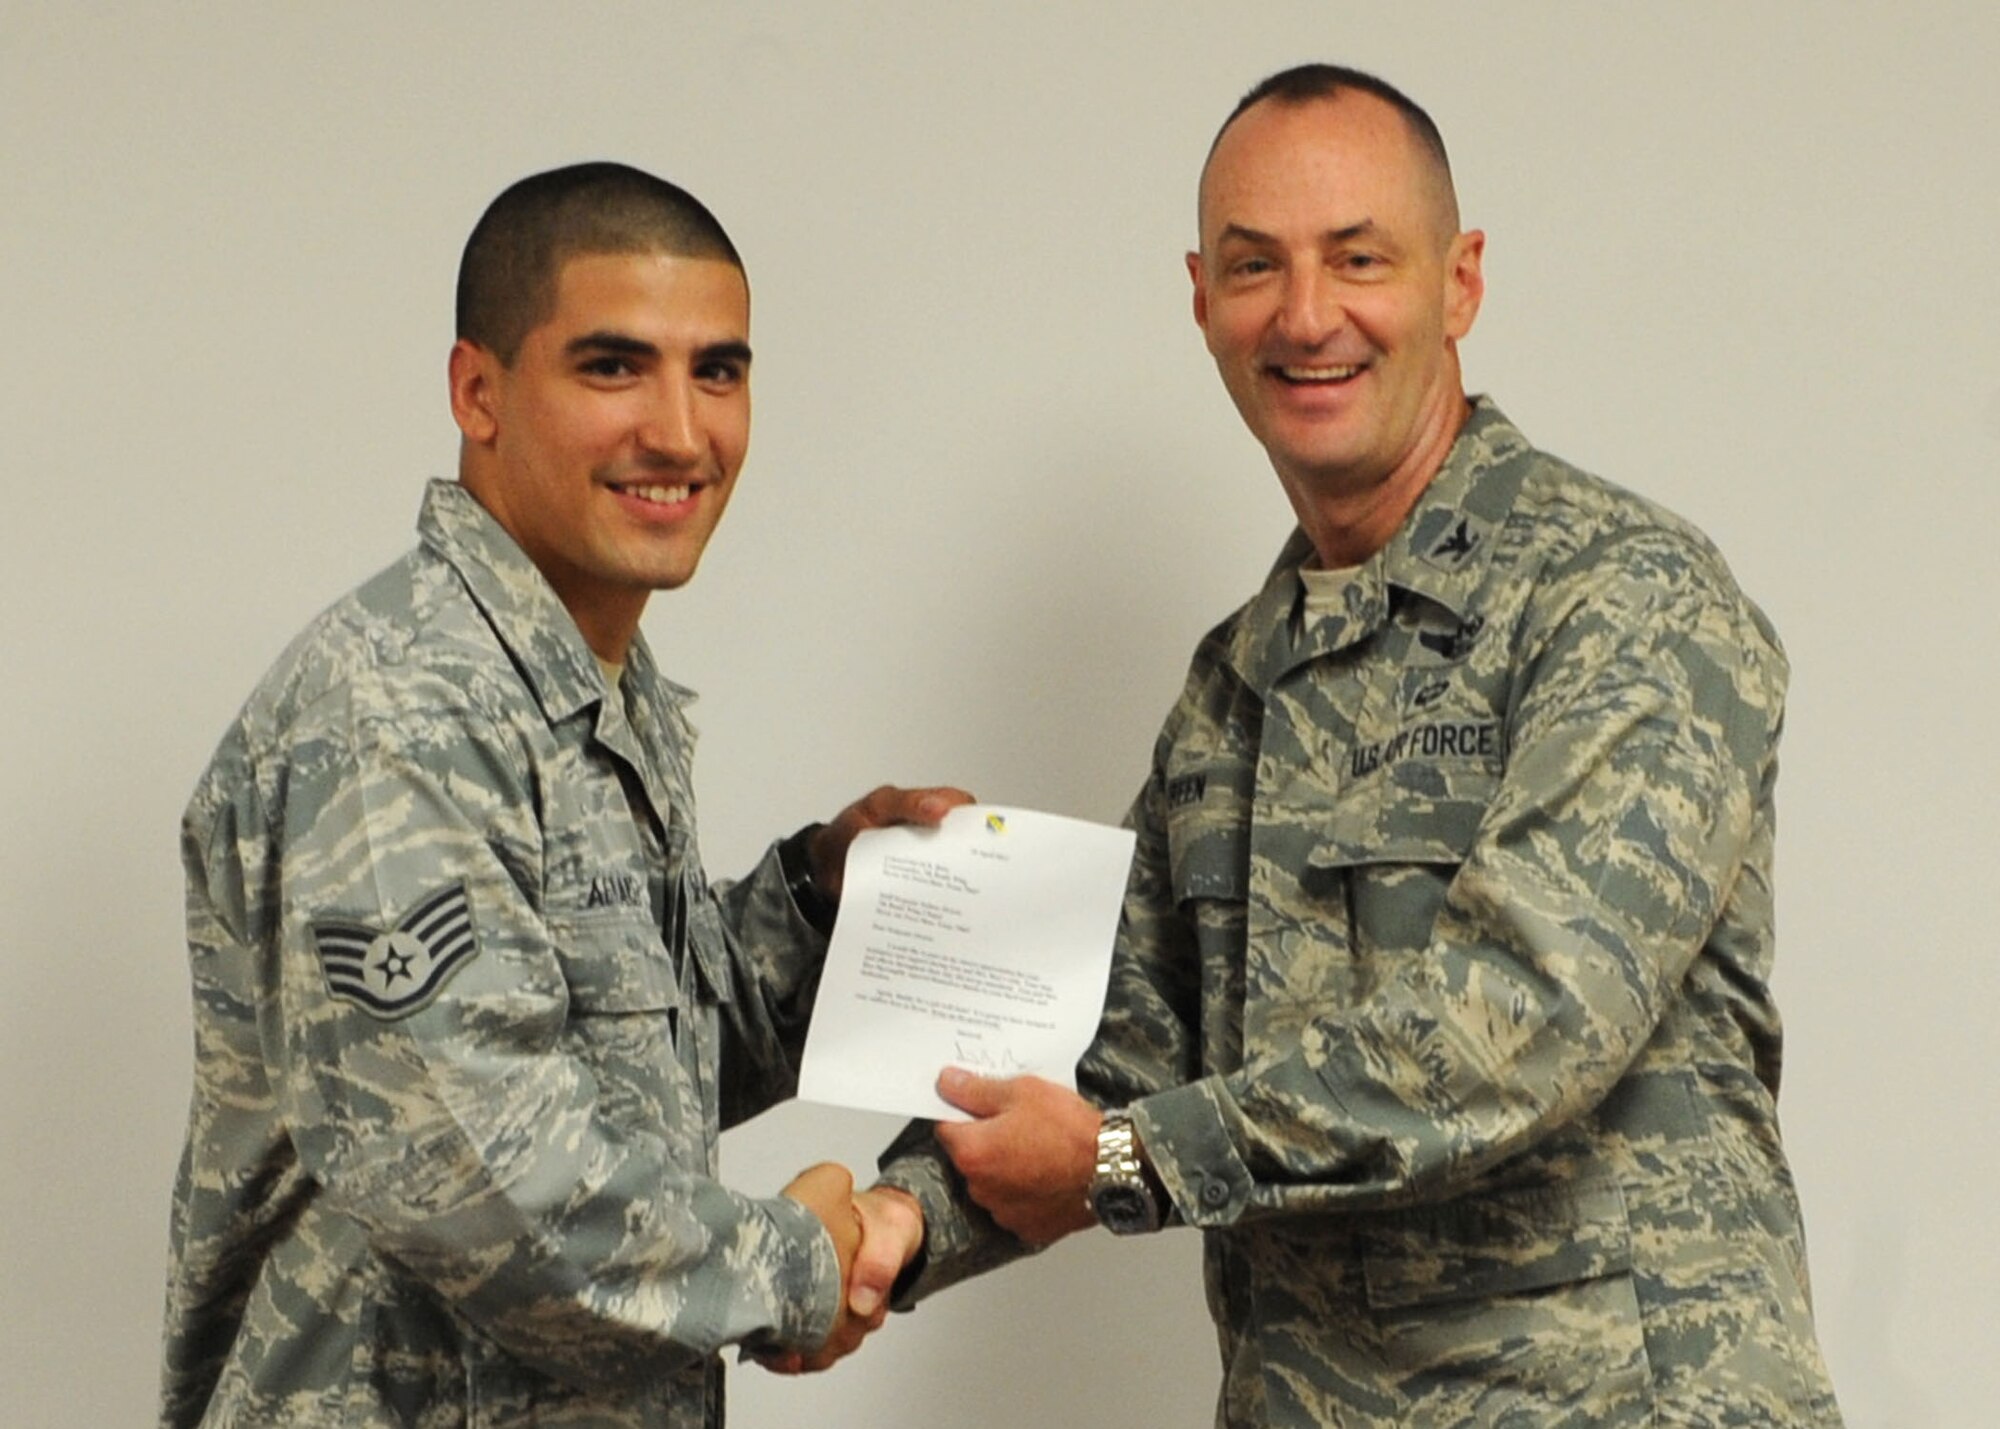 U.S. Air Force Staff Sgt. Joshua Alvarez, 7th Force Support Squadron, receives the 7th Bomb Wing’s superior performer of the month award from Col. David Béen, 7th Bomb Wing commander April 12, 2012, at Dyess Air Force Base, Texas. Alvarez was recognized for assisting protocol with Gen. Edward Rice Jr., Air Education and Training Command commander, visit to Dyess. (U.S. Air Force photo by Airman 1st Class Peter Thompson/ Released)